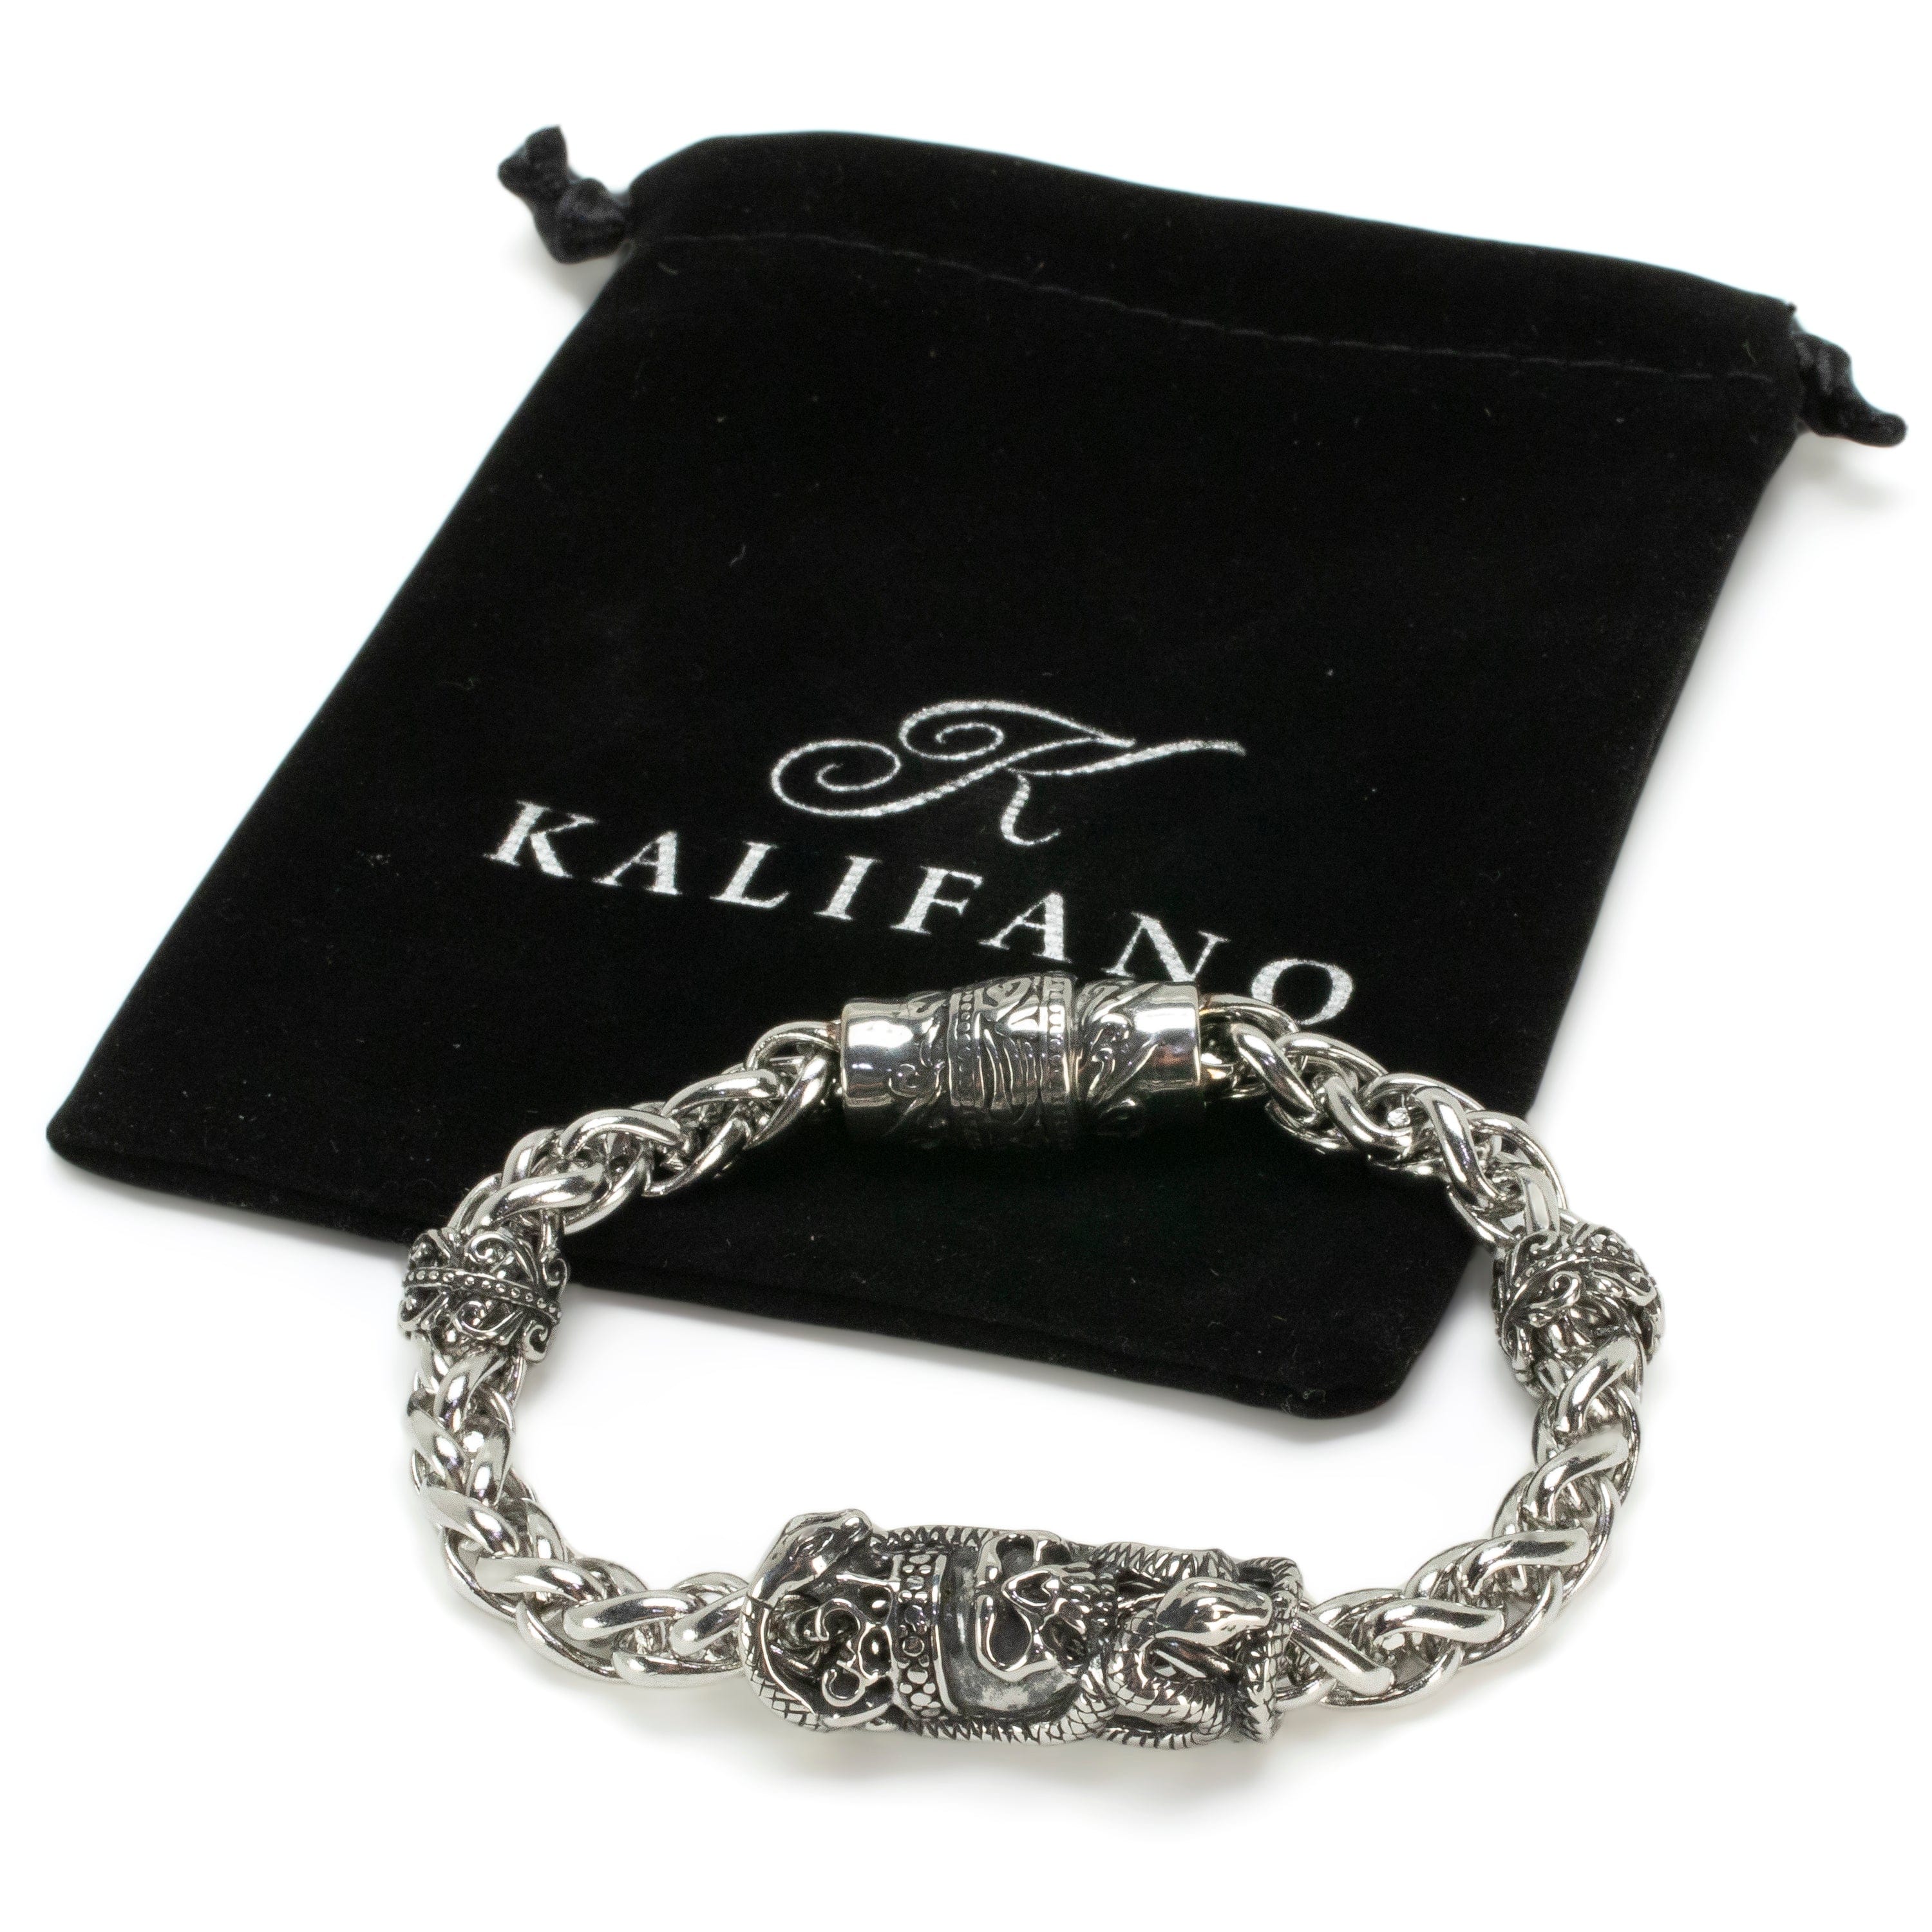 Kalifano Stainless Steel Bracelets Stainless Steel Bracelet with Skulls and Snakes PLAT-BSS-10